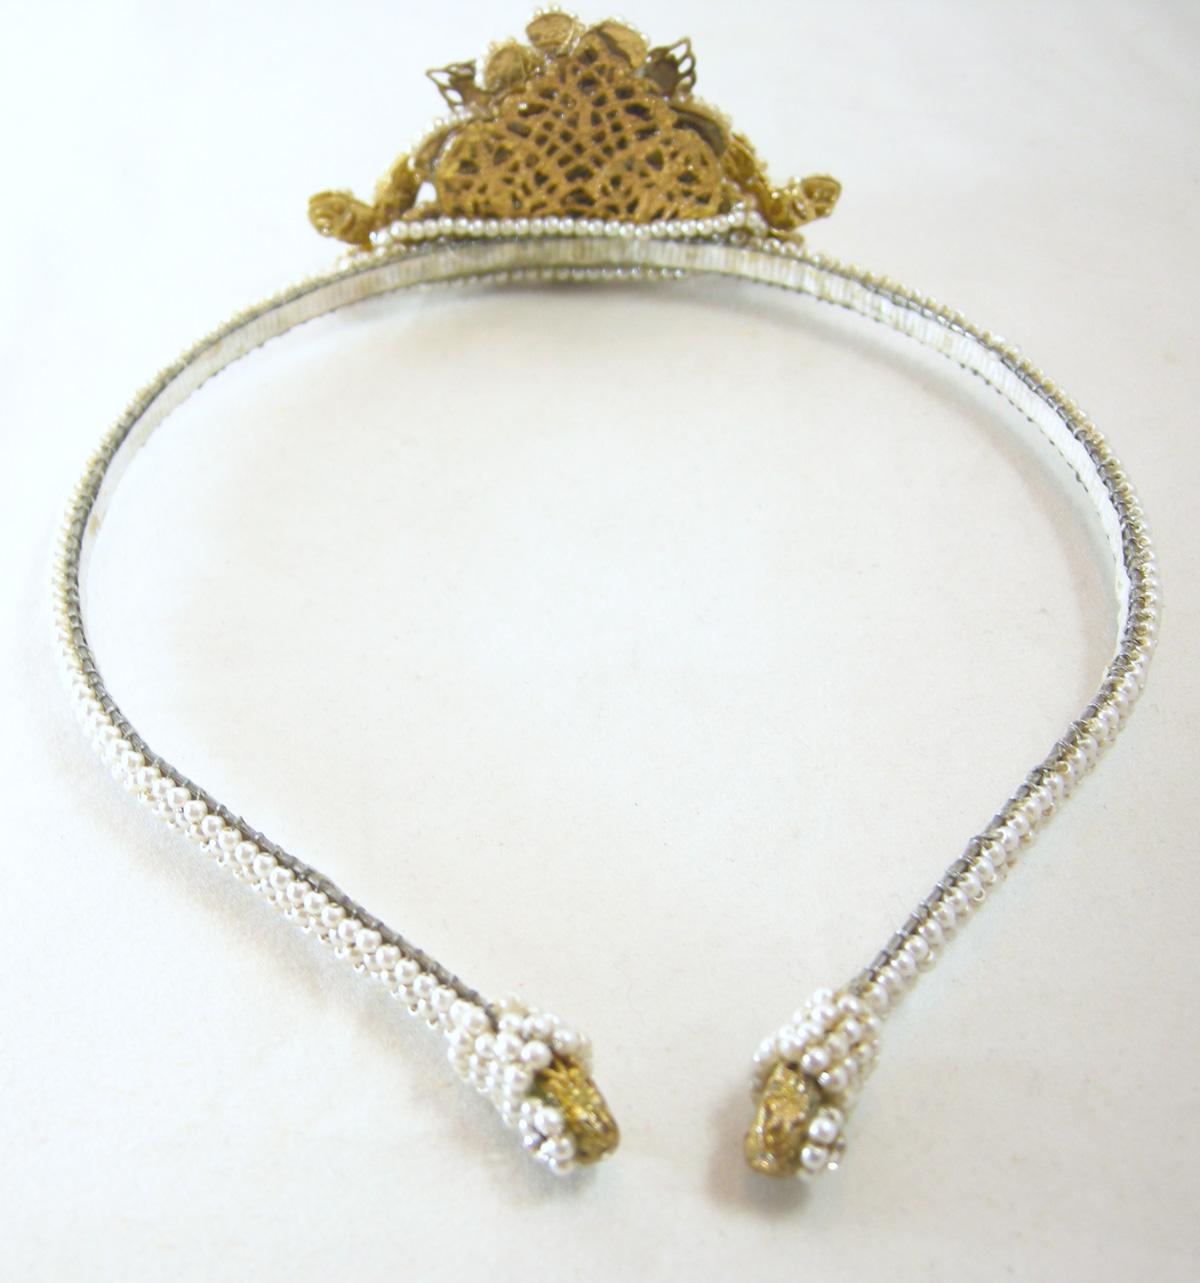 Rare Vintage Miriam Haskell Faux Pearl Tiara/Headband In Excellent Condition For Sale In New York, NY